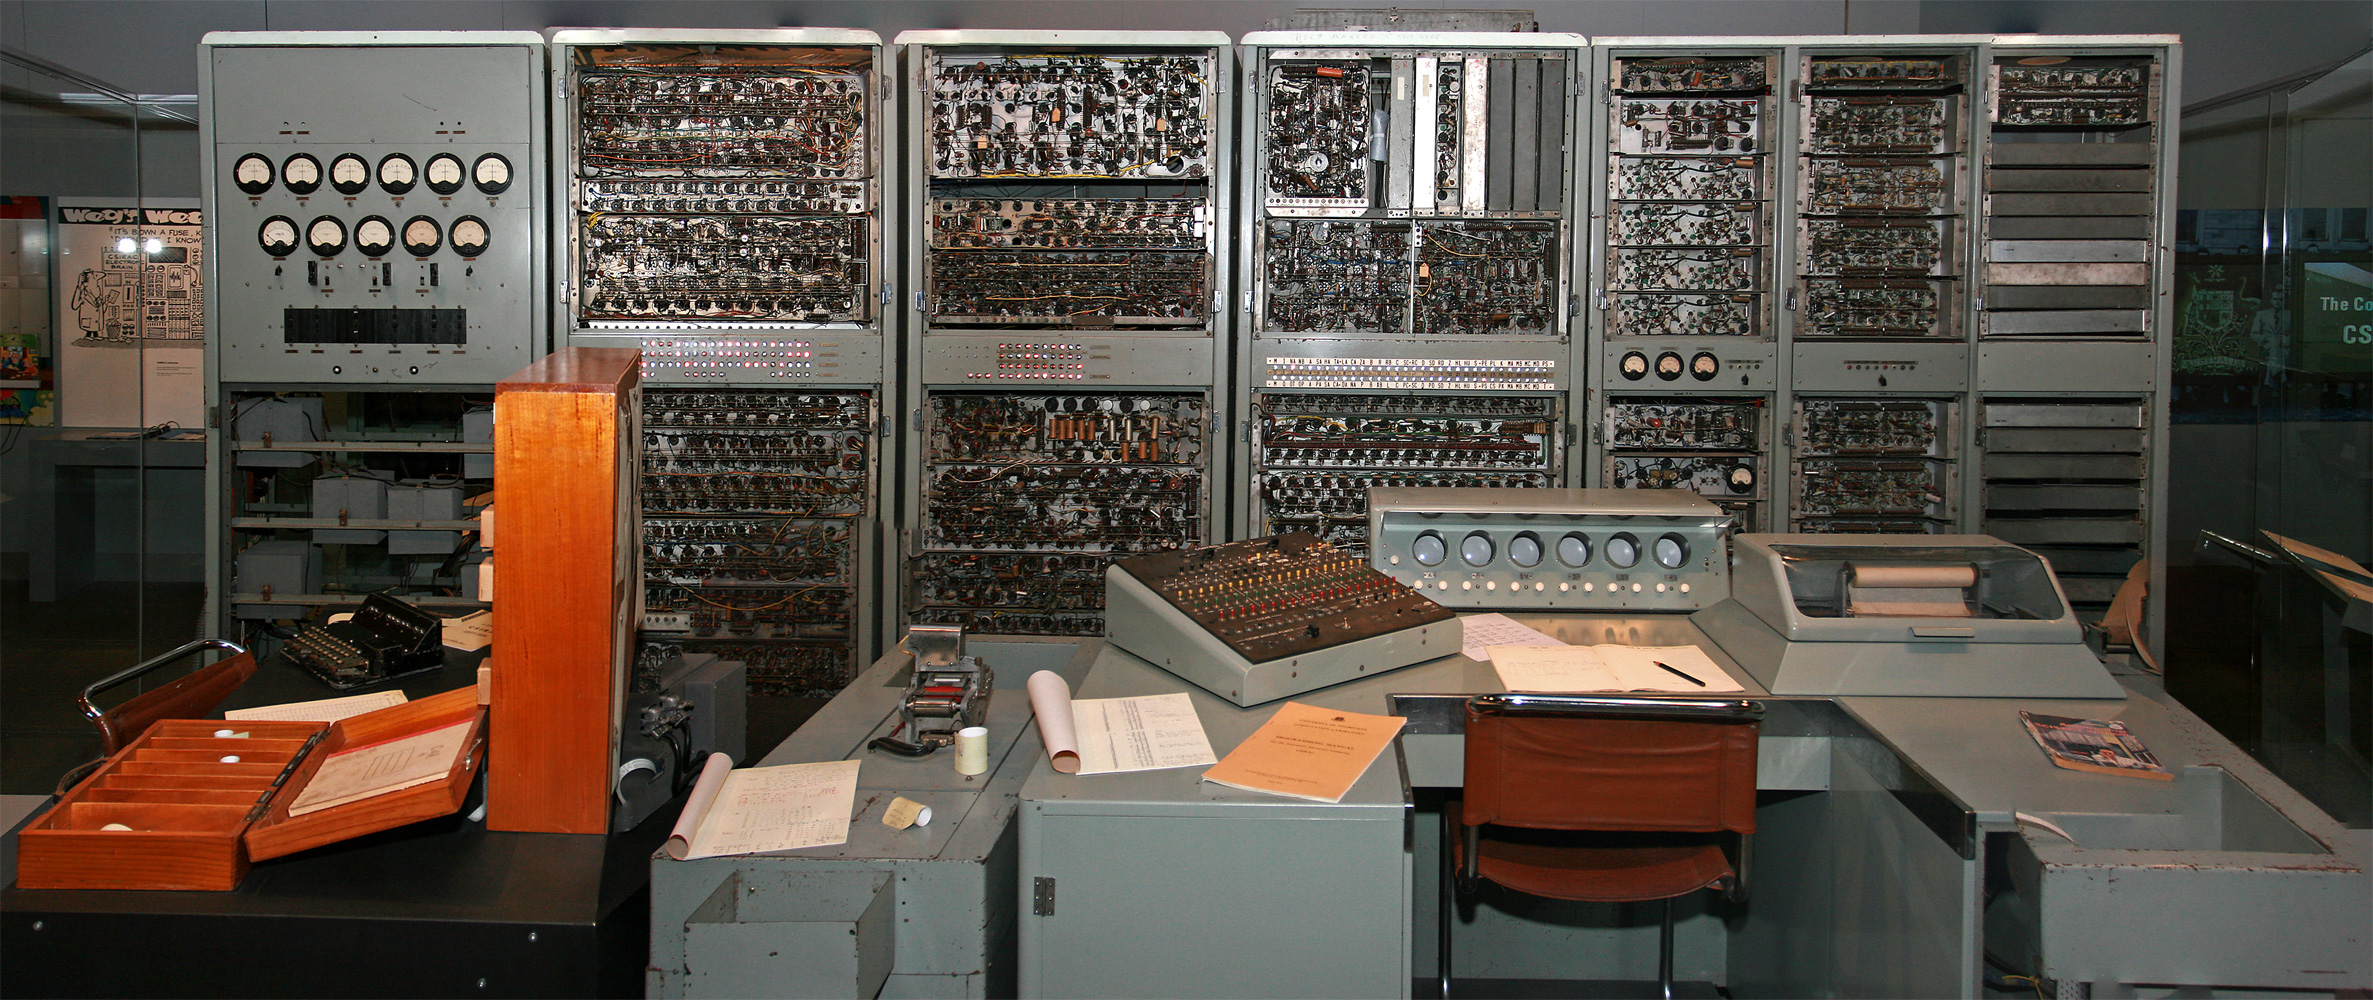 the-csirac-computer-reconstucted